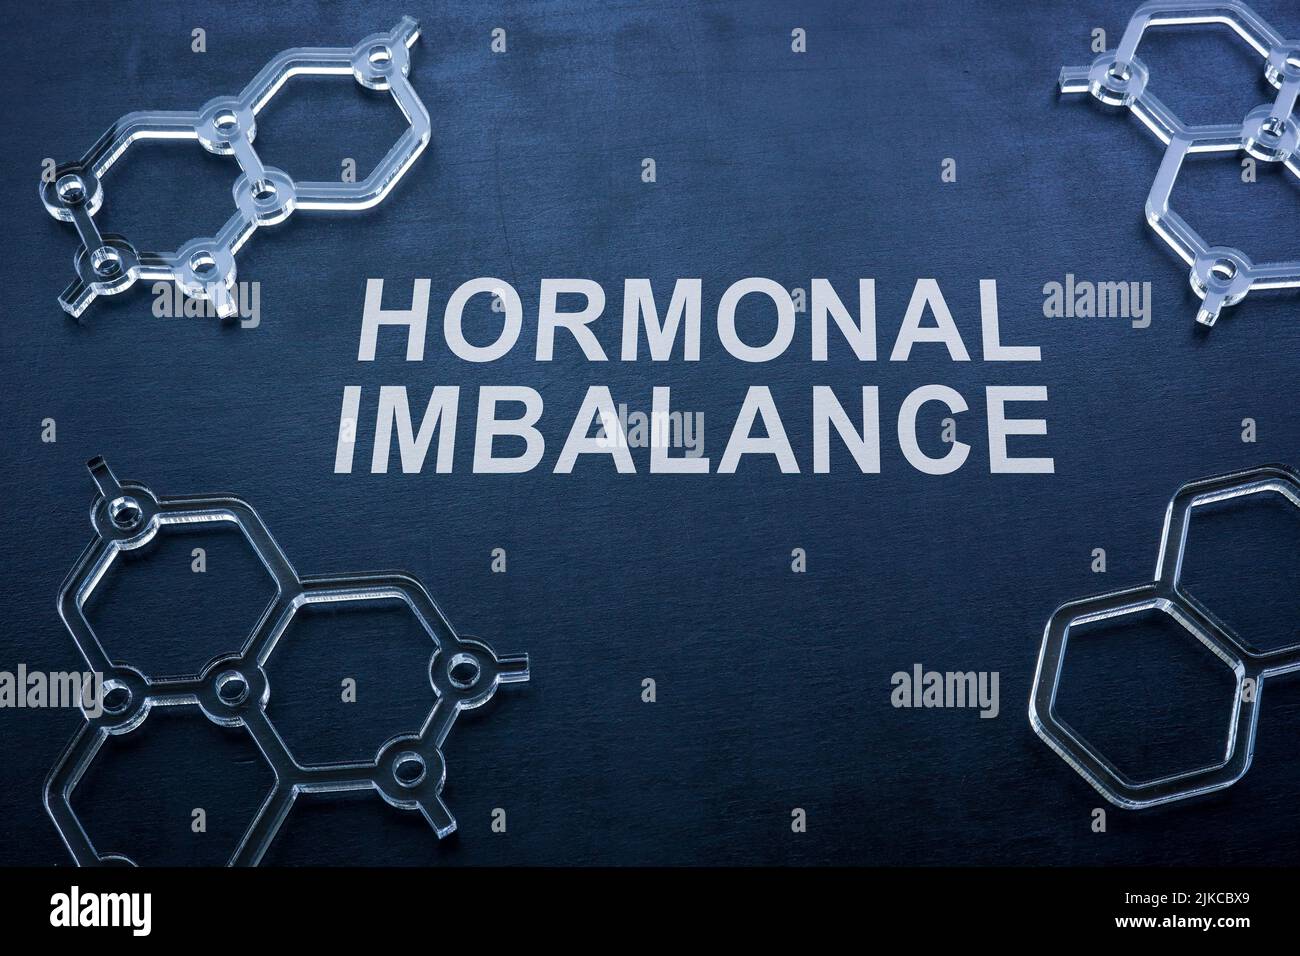 Hormonal imbalance on the blackboard and chemical models. Stock Photo